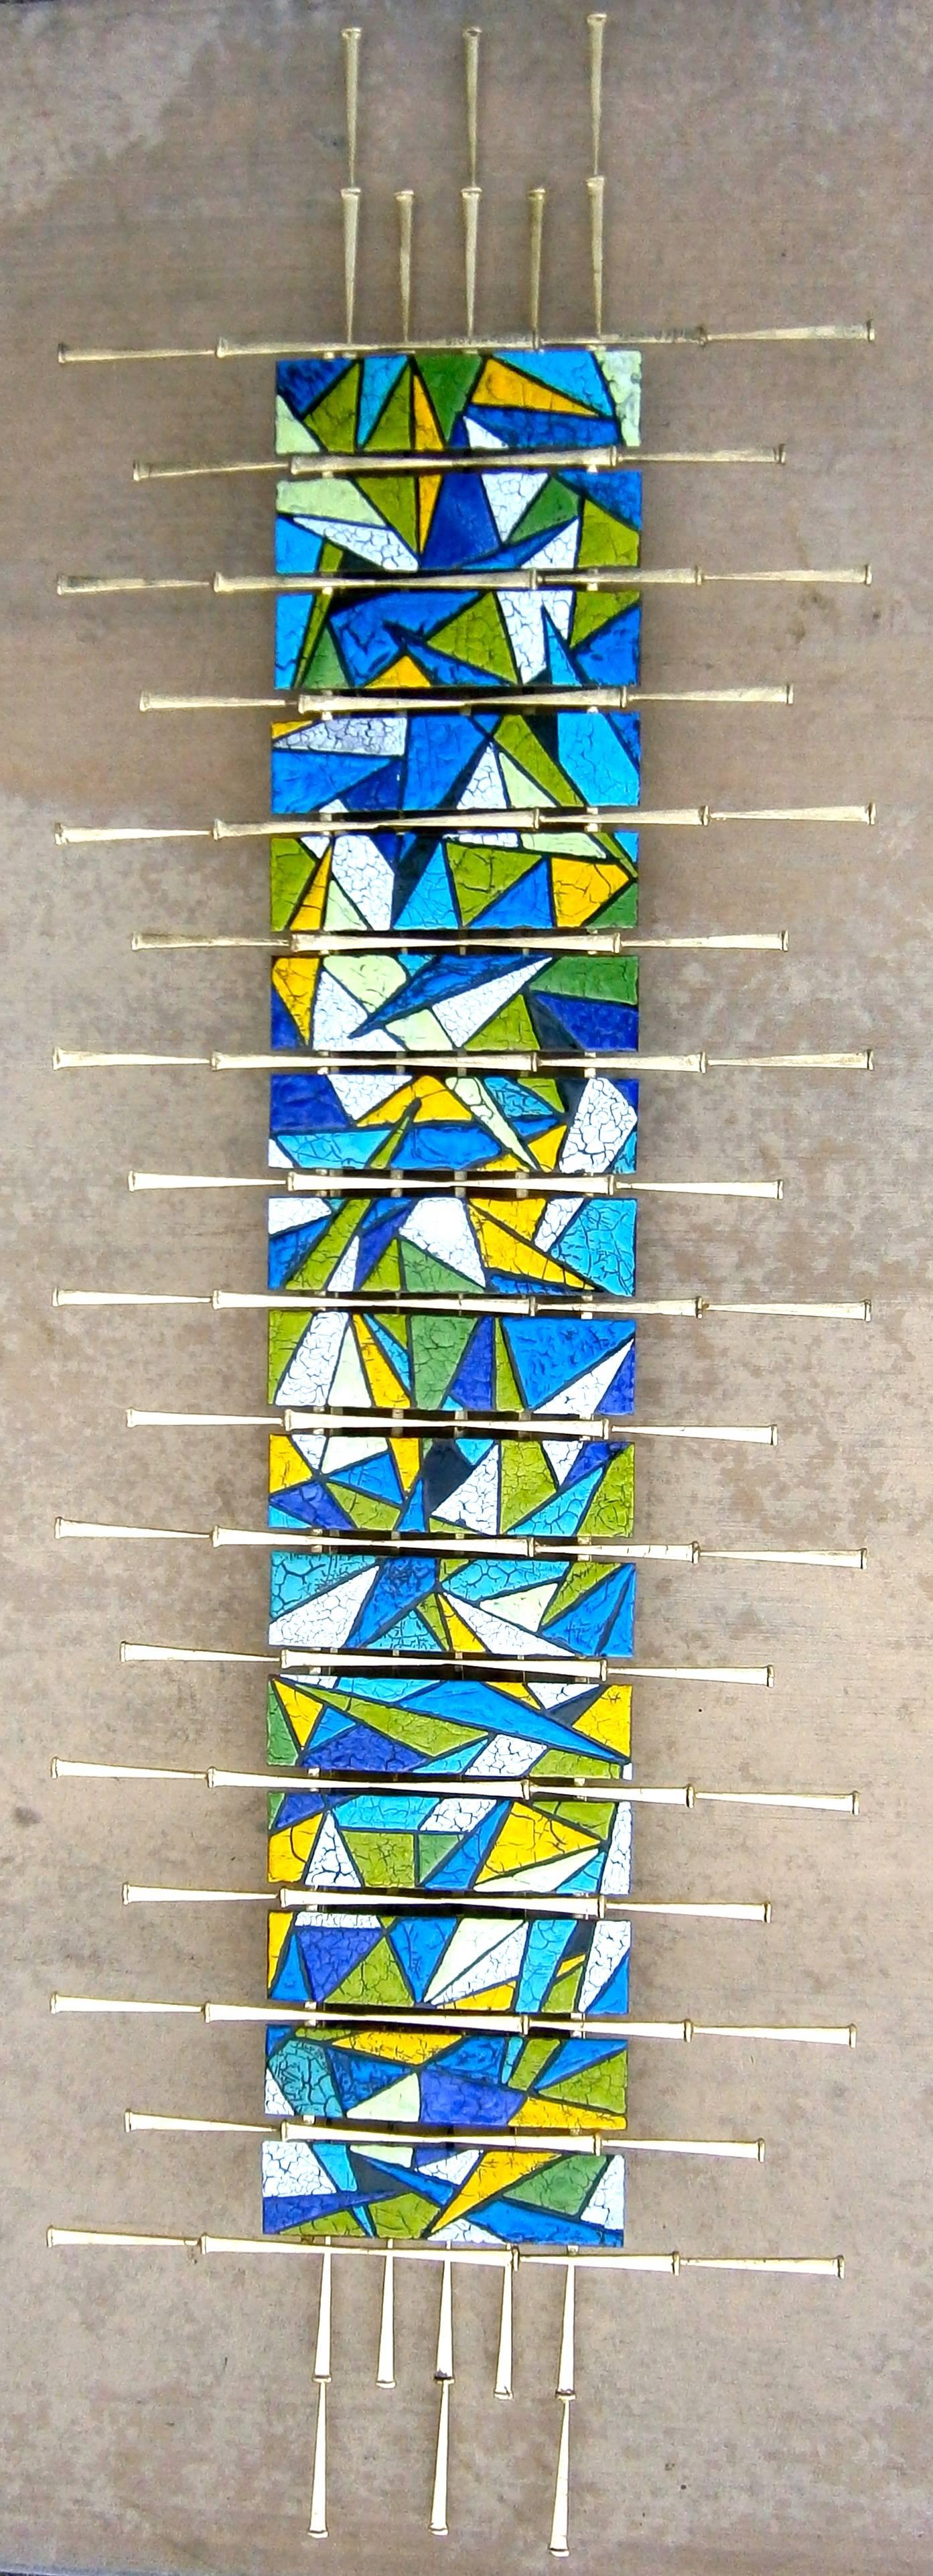 A vividly colorful contemporary wall sculpture by American studio artists Del and Brenda Williams. Composed of a metal framework that is finished in gold leaf, the enamel slats were hand-made and are reminiscent of vibrantly colored stained glass